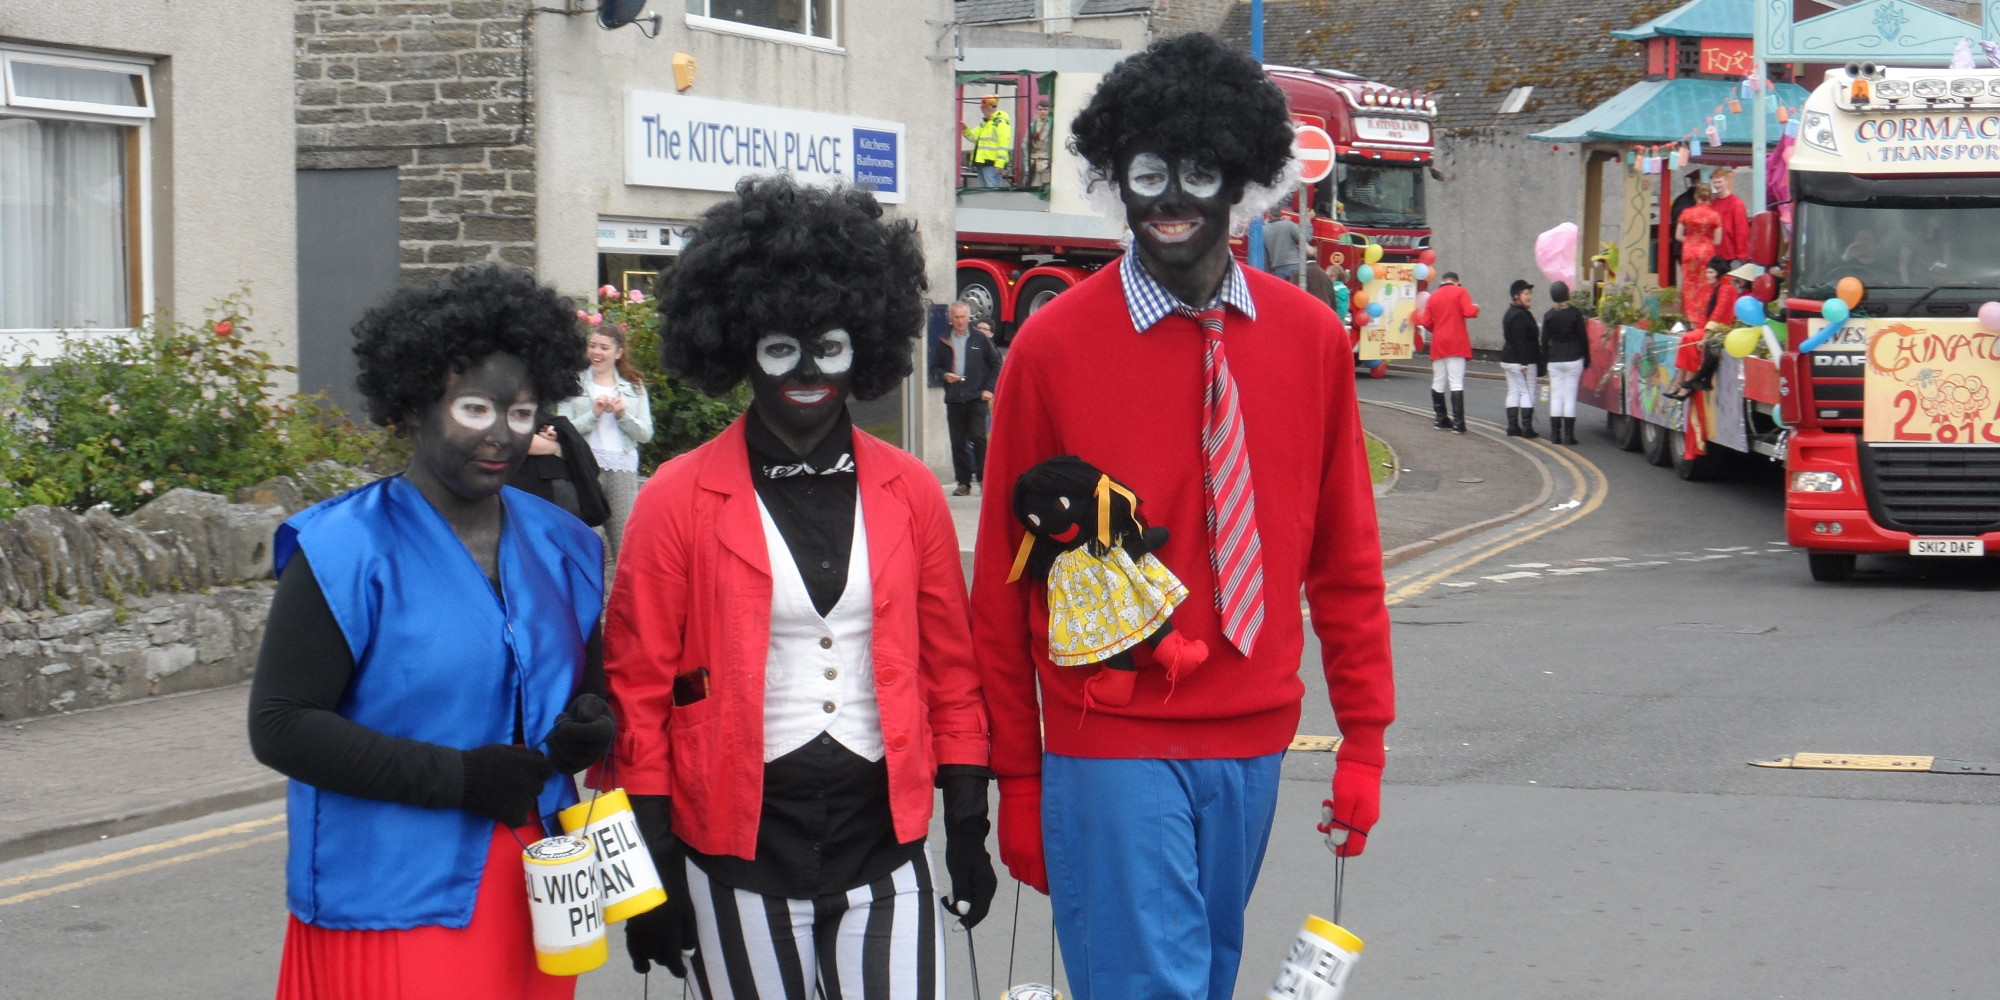 Why are golliwogs seen to be racist?